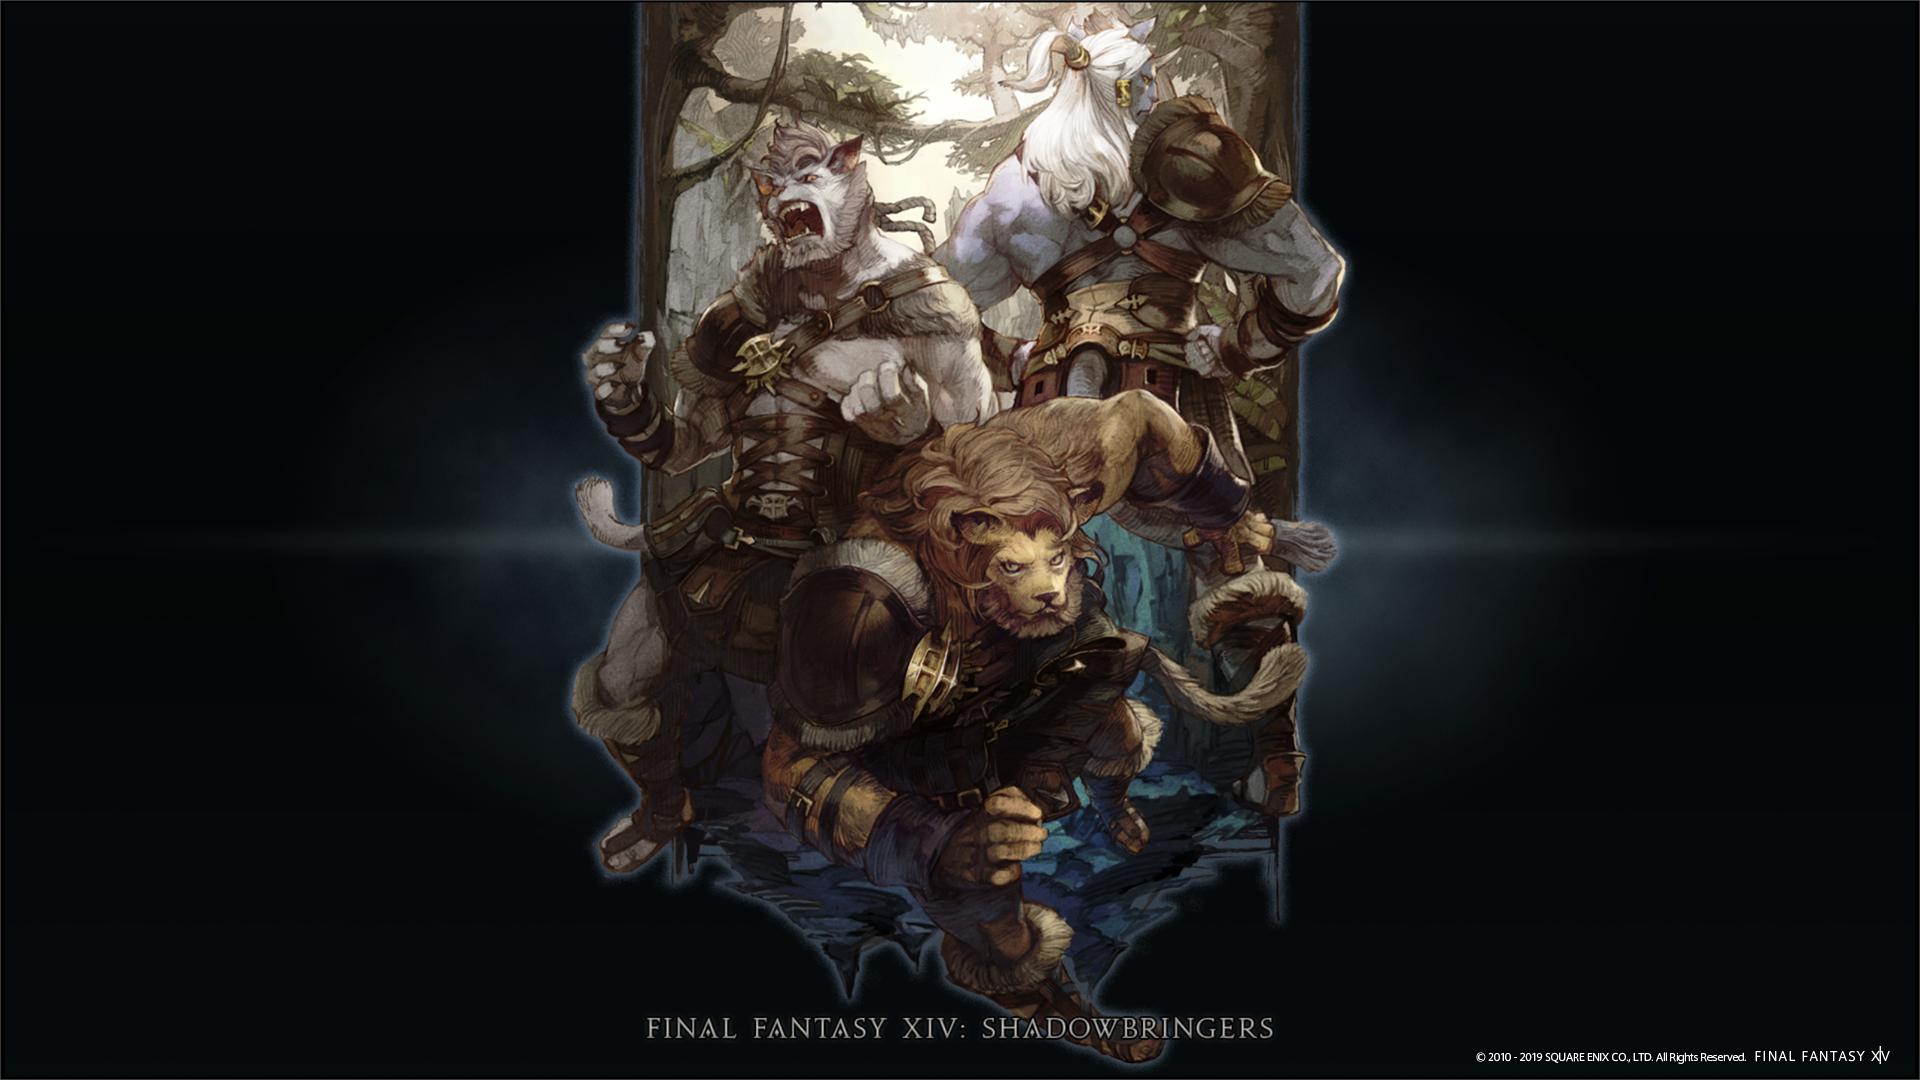 Final Fantasy Xiv Announcing The Second Playable Race Making Its Debut In Shadowbringers The Hrothgar Ffxiv